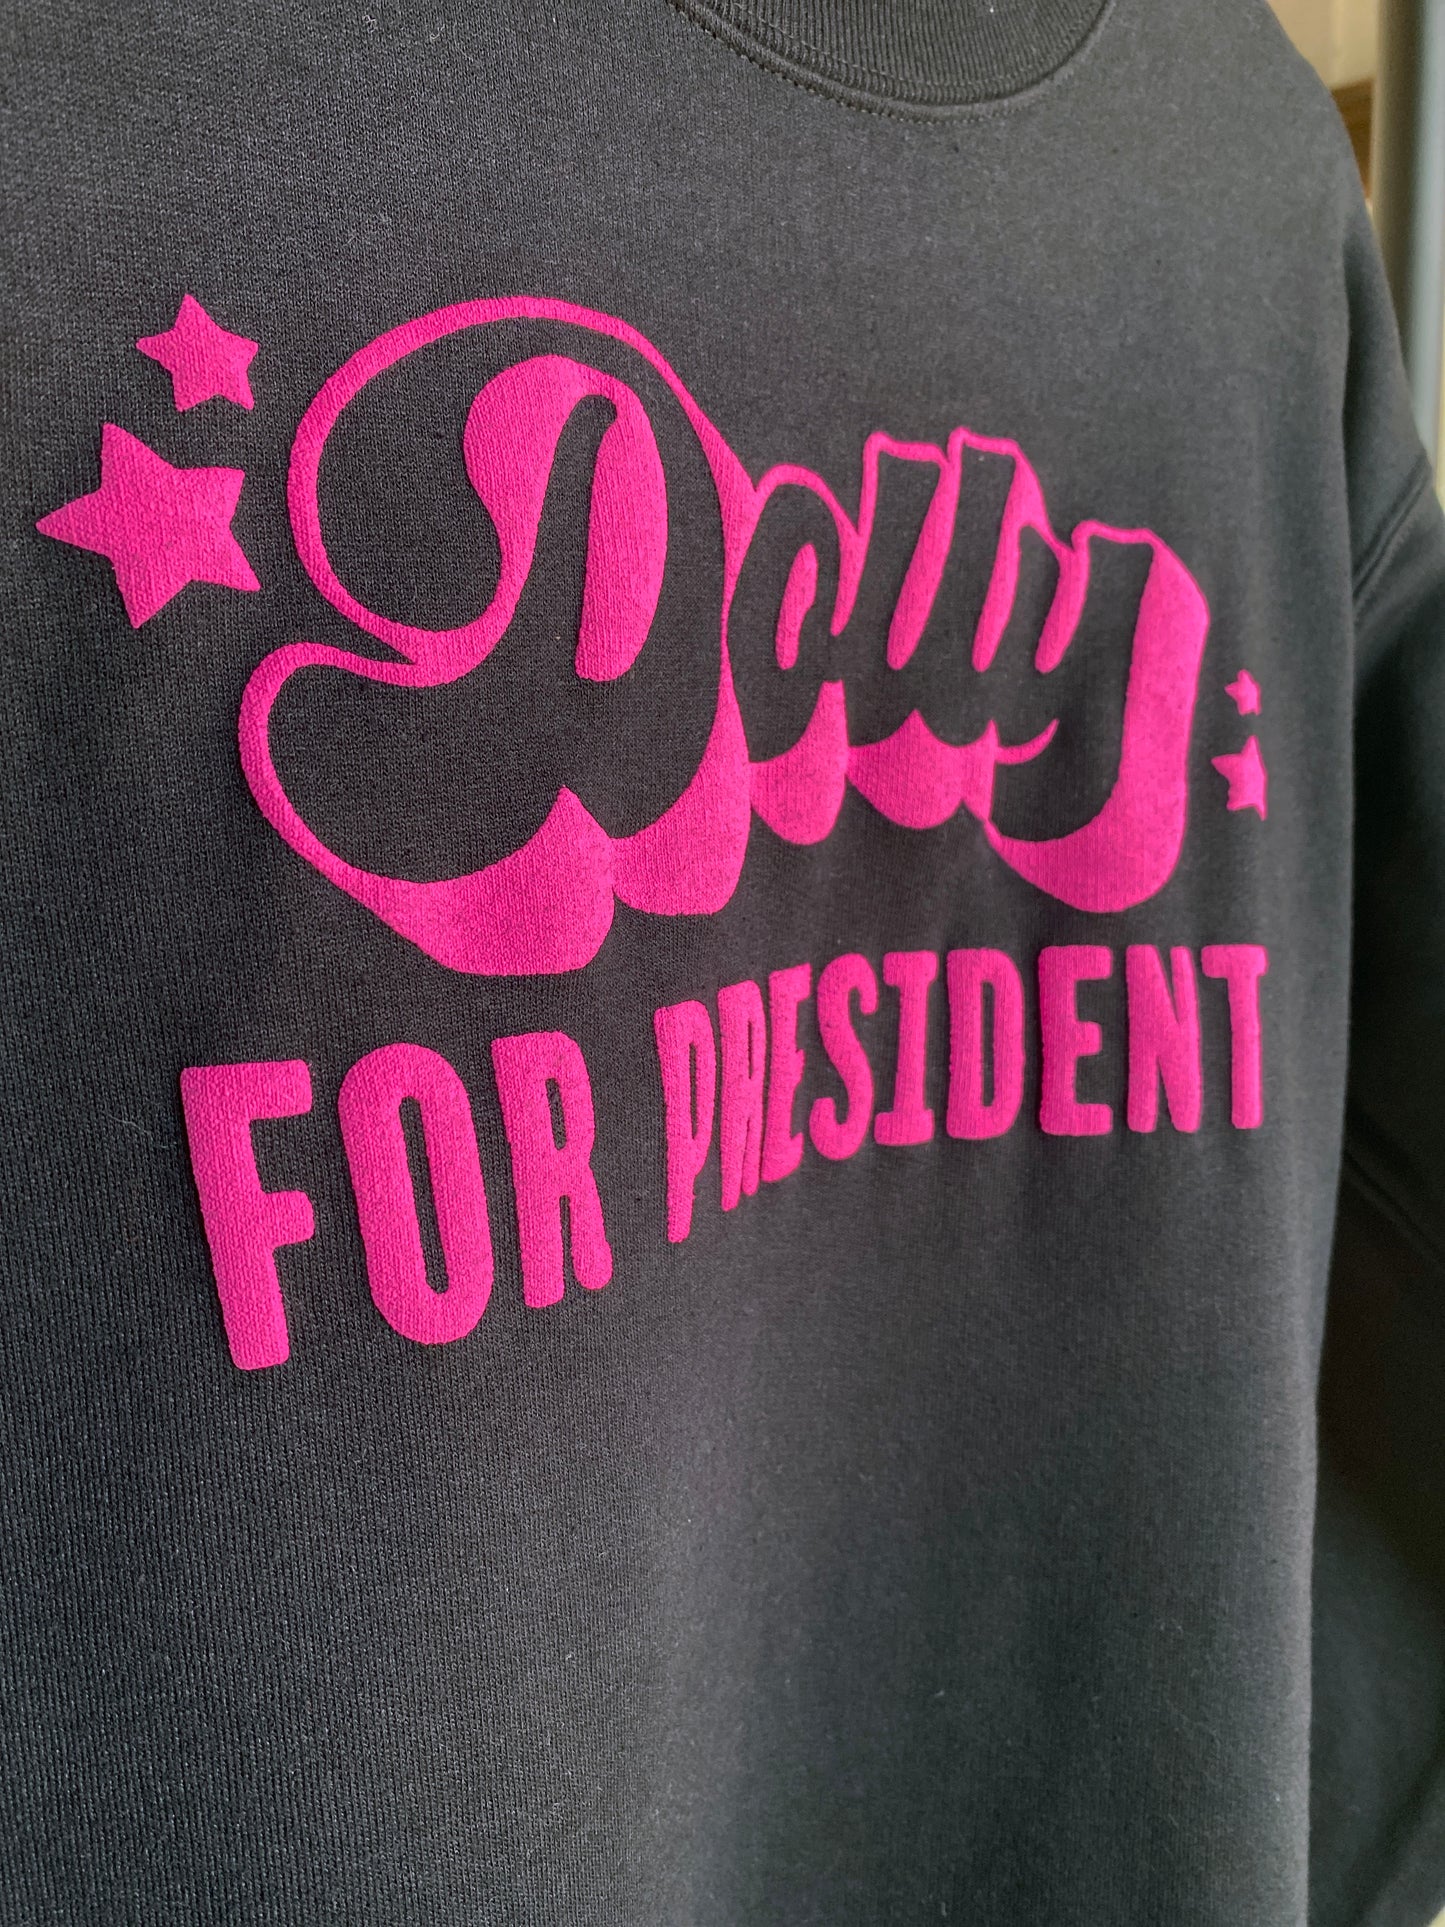 Dolly for President Puff Graphic Sweatshirt - Black